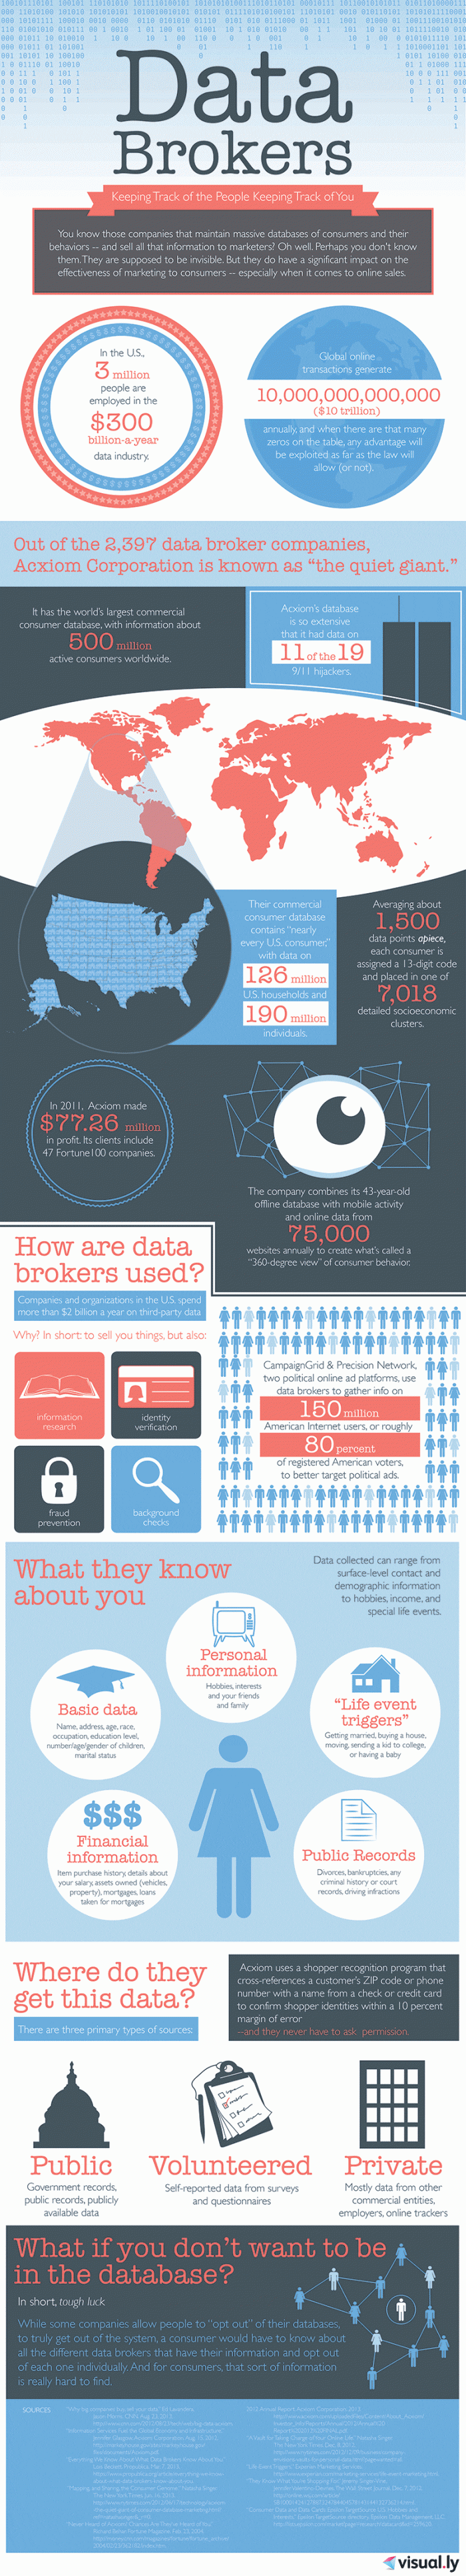 data-brokers_51af8a9ae7d45